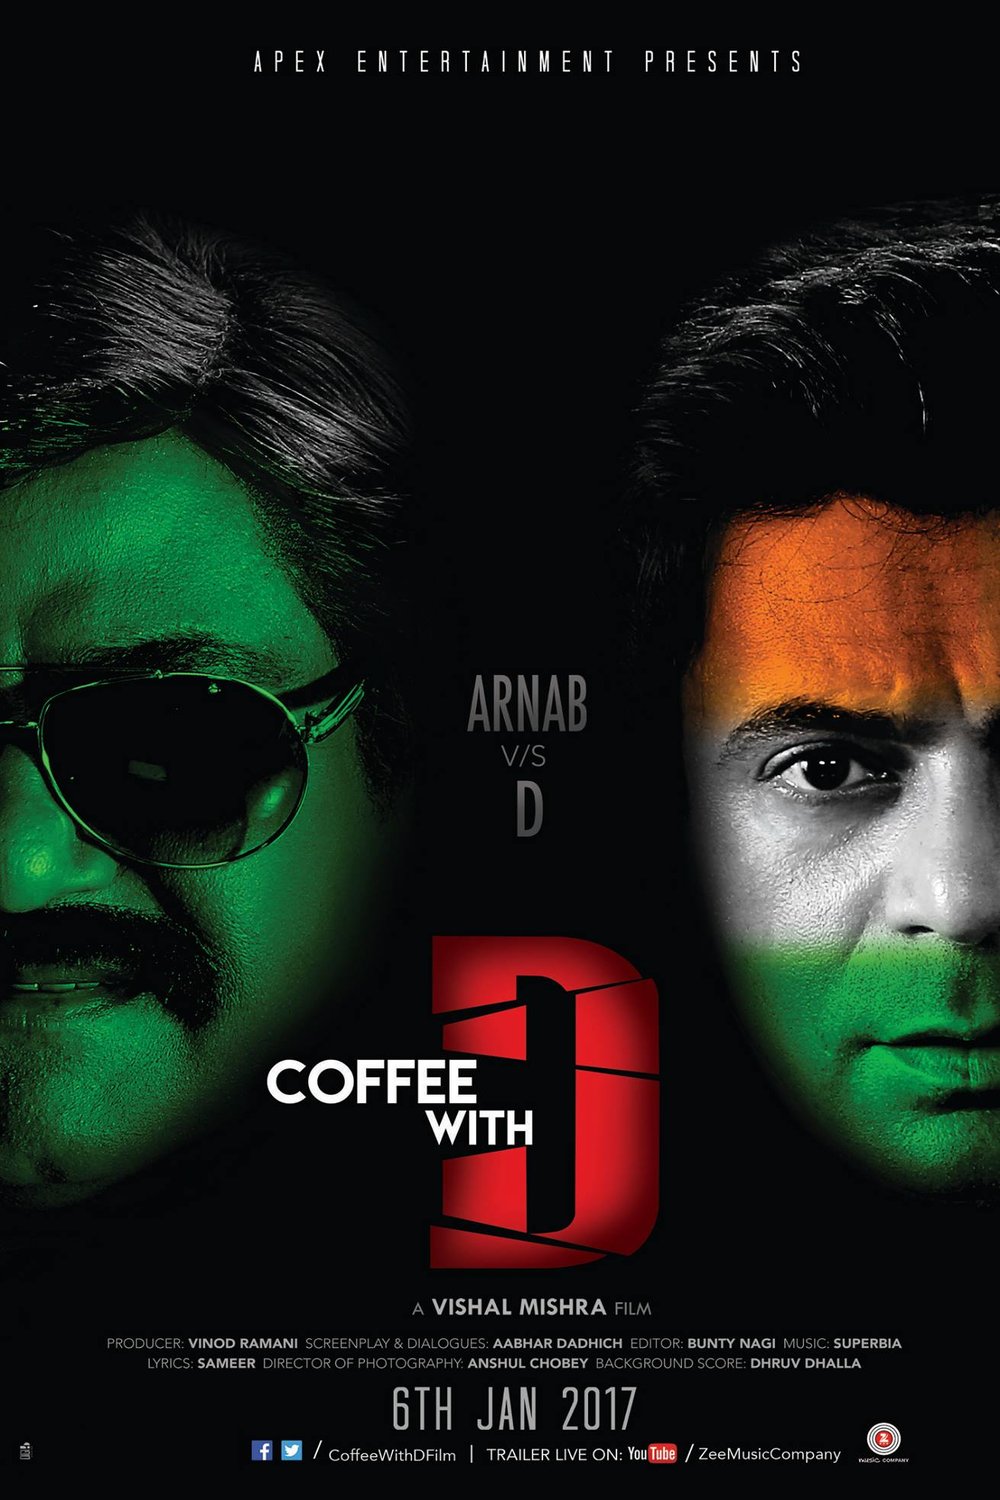 Hindi poster of the movie Coffee with D